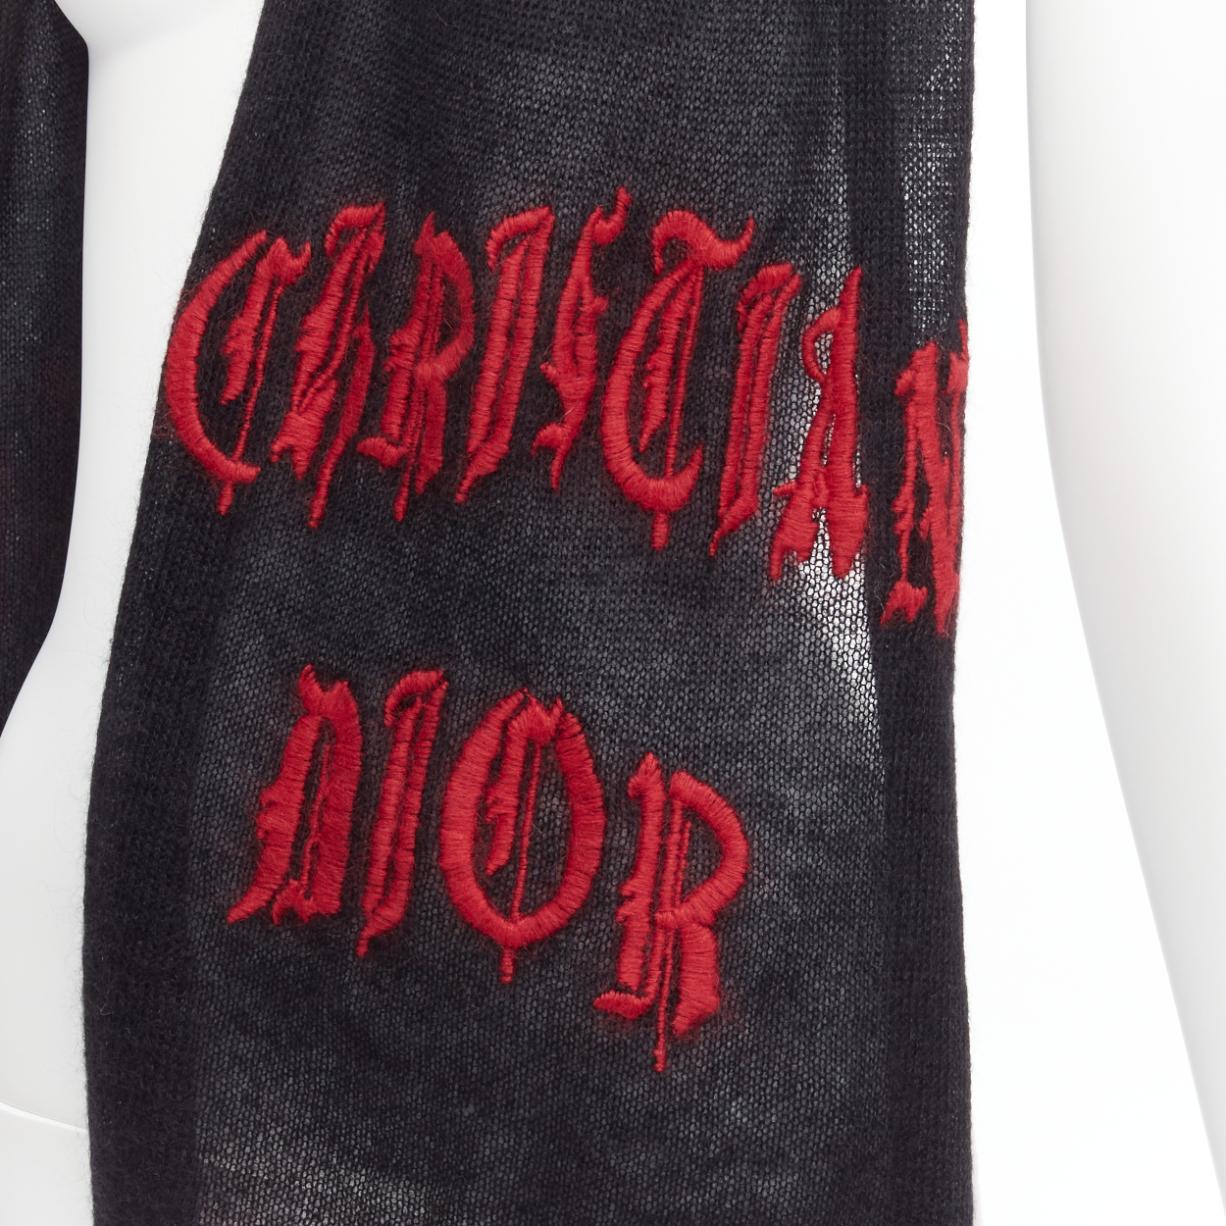 CHRISTIAN DIOR John Galliano Vintage red gothic 1947 punk logo black mohair blend scarf
Reference: TGAS/D00376
Brand: Christian Dior
Designer: John Galliano
Material: Mohair, Polyamide, Boucle Wool
Color: Black, Red
Pattern: Solid
Made in: